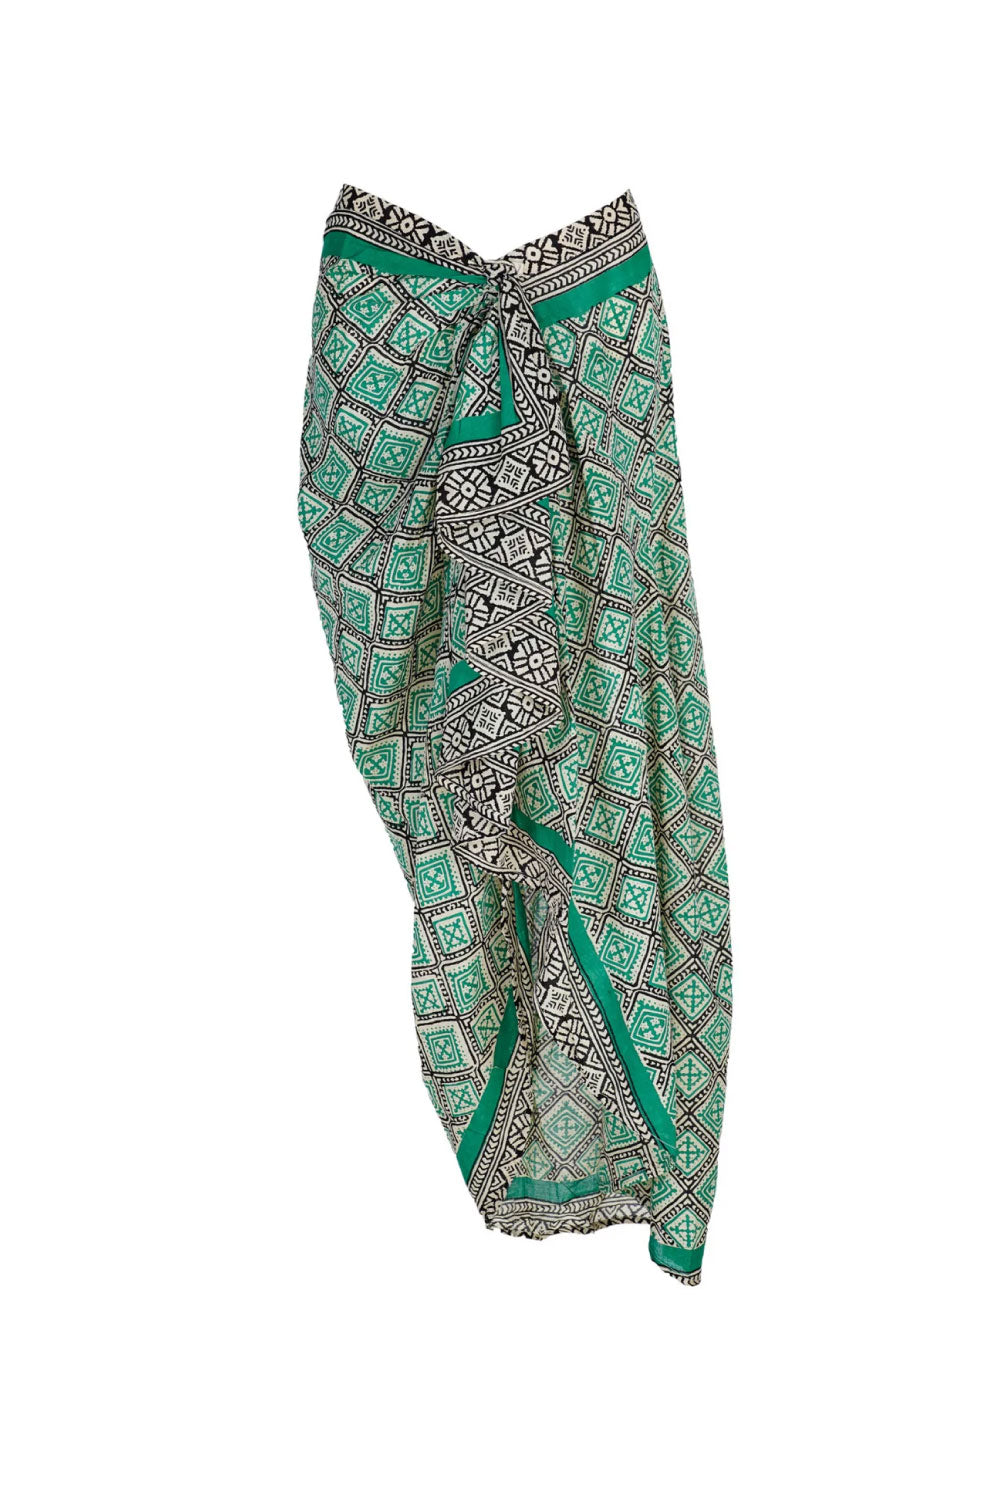 Image of the front of Guadalupe Design's Teresa Pareo Skirt in Green.